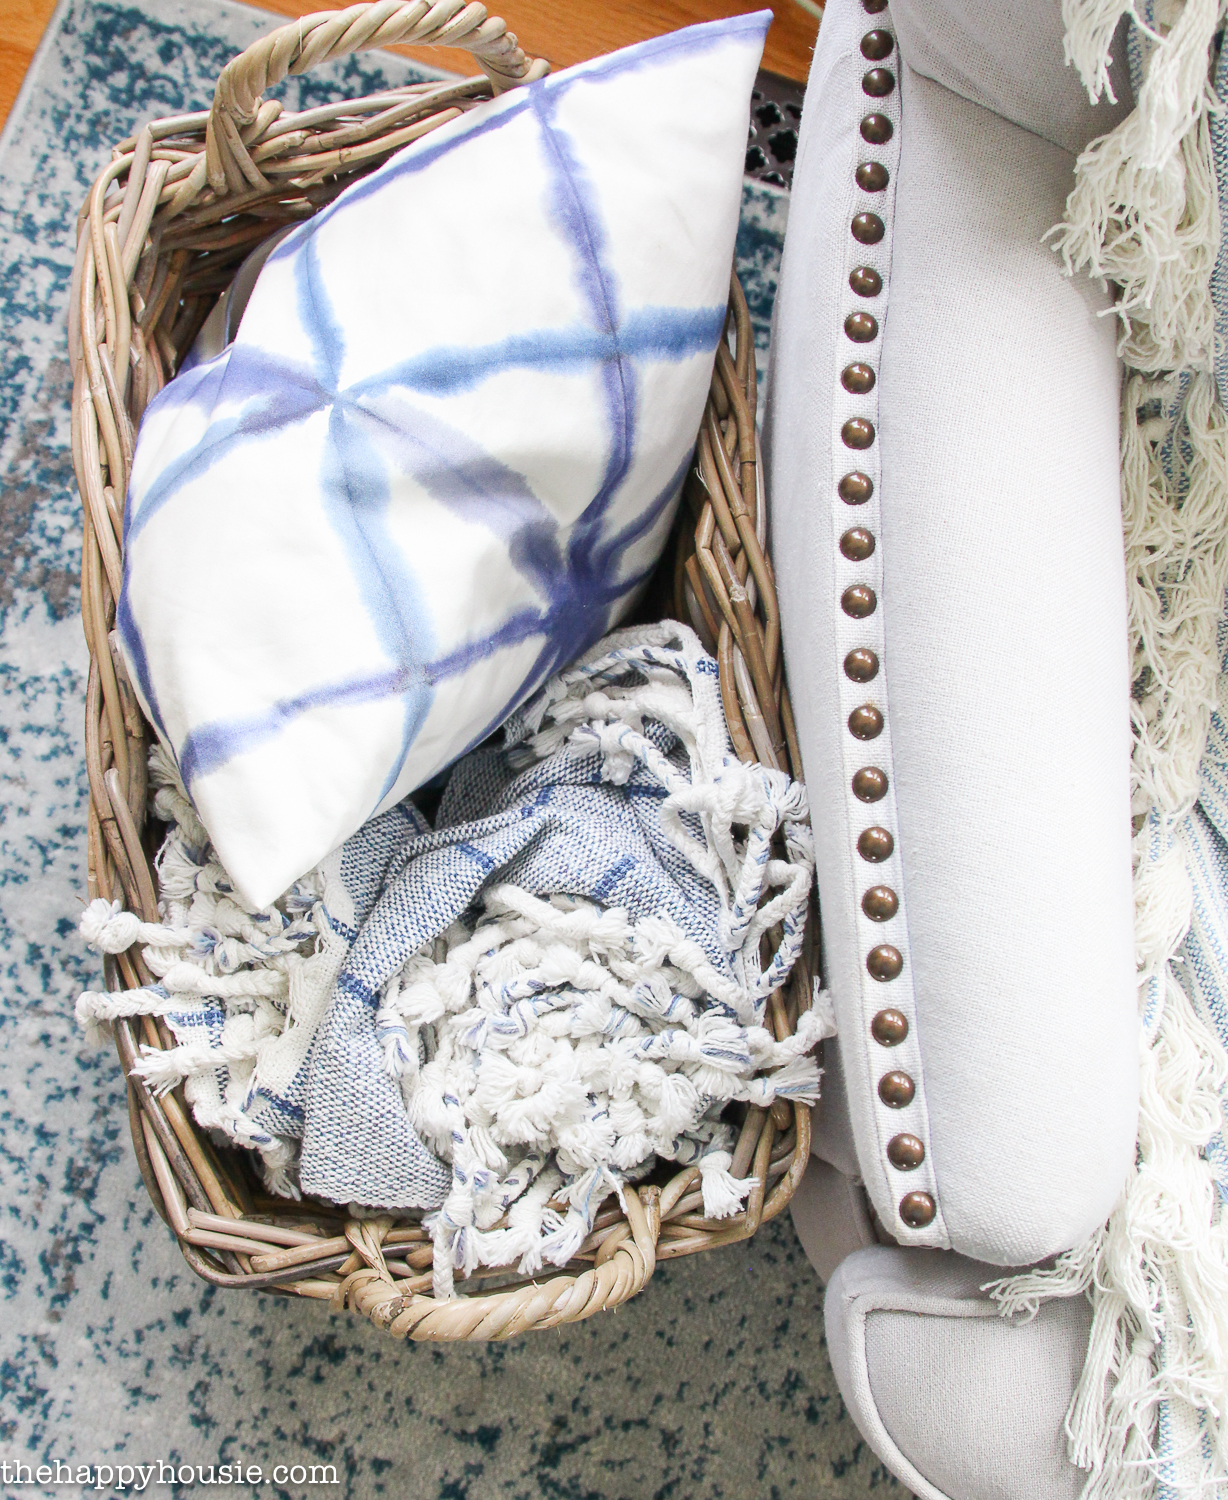 Small basket filled with a pillow and throw blanket.